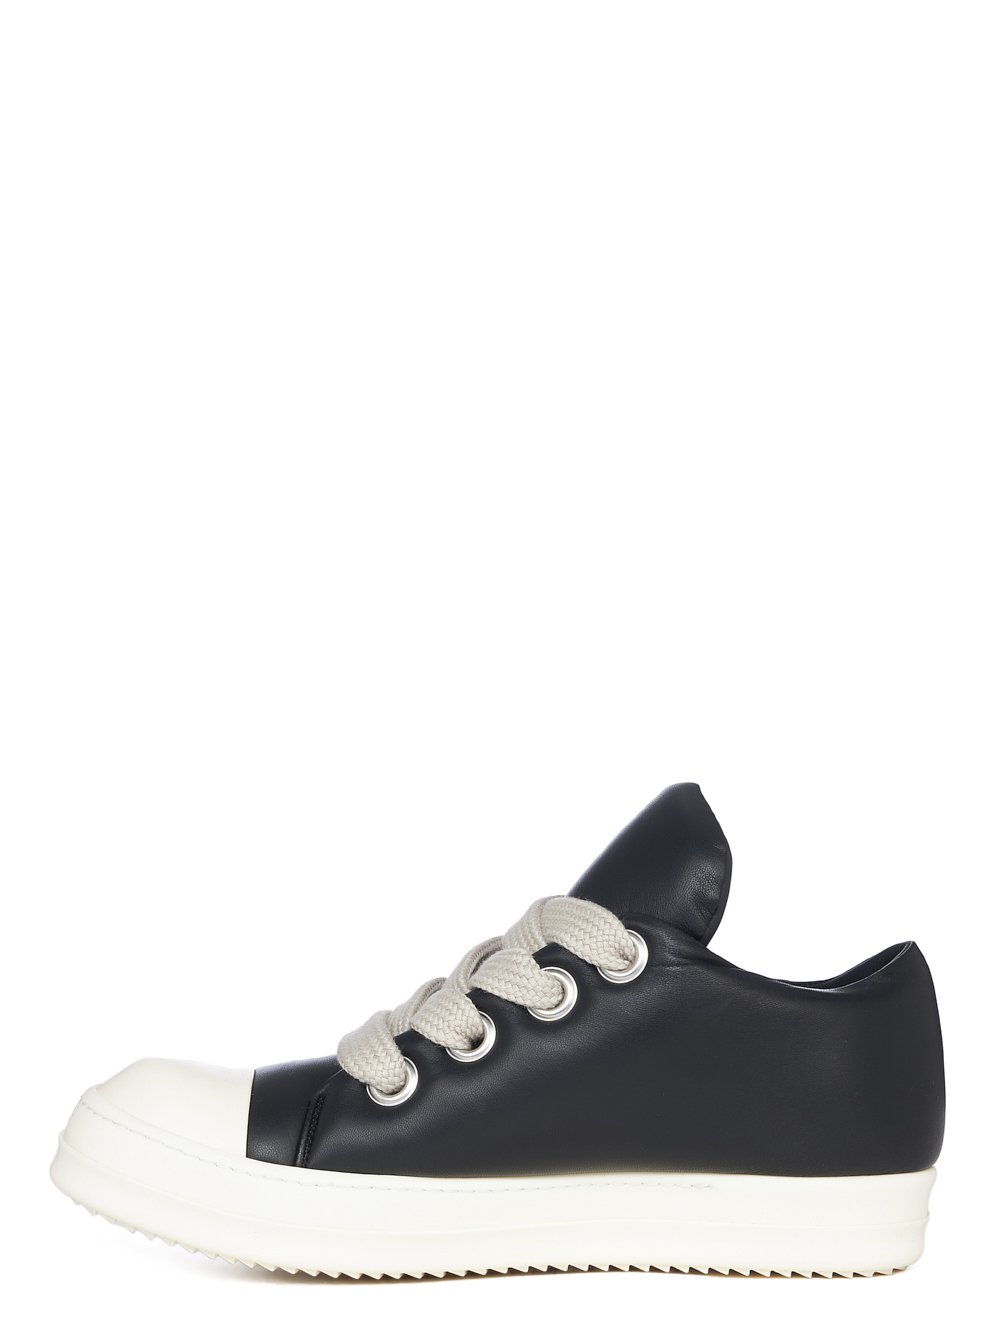 RICK OWENS FW23 LUXOR JUMBO LACE PADDED LOW SNEAKS IN BLACK AND MILK PEACHED LAMBSKIN